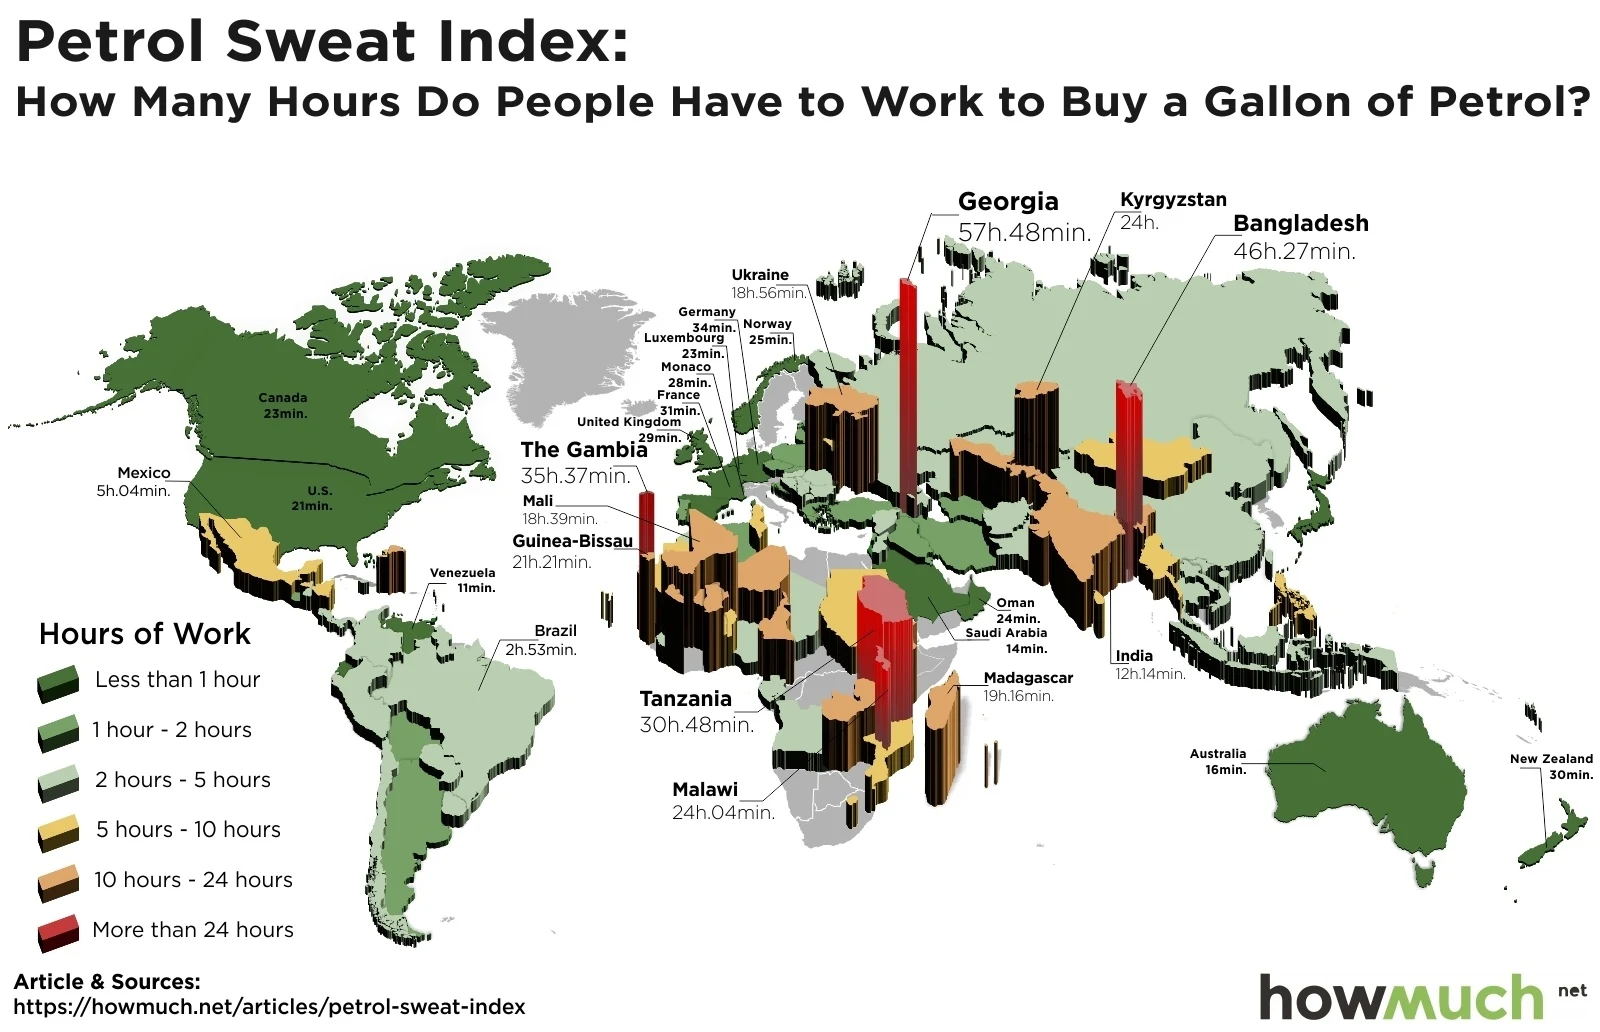 Petrol sweat index: How many hours do people have to work to buy a gallon of petrol? 